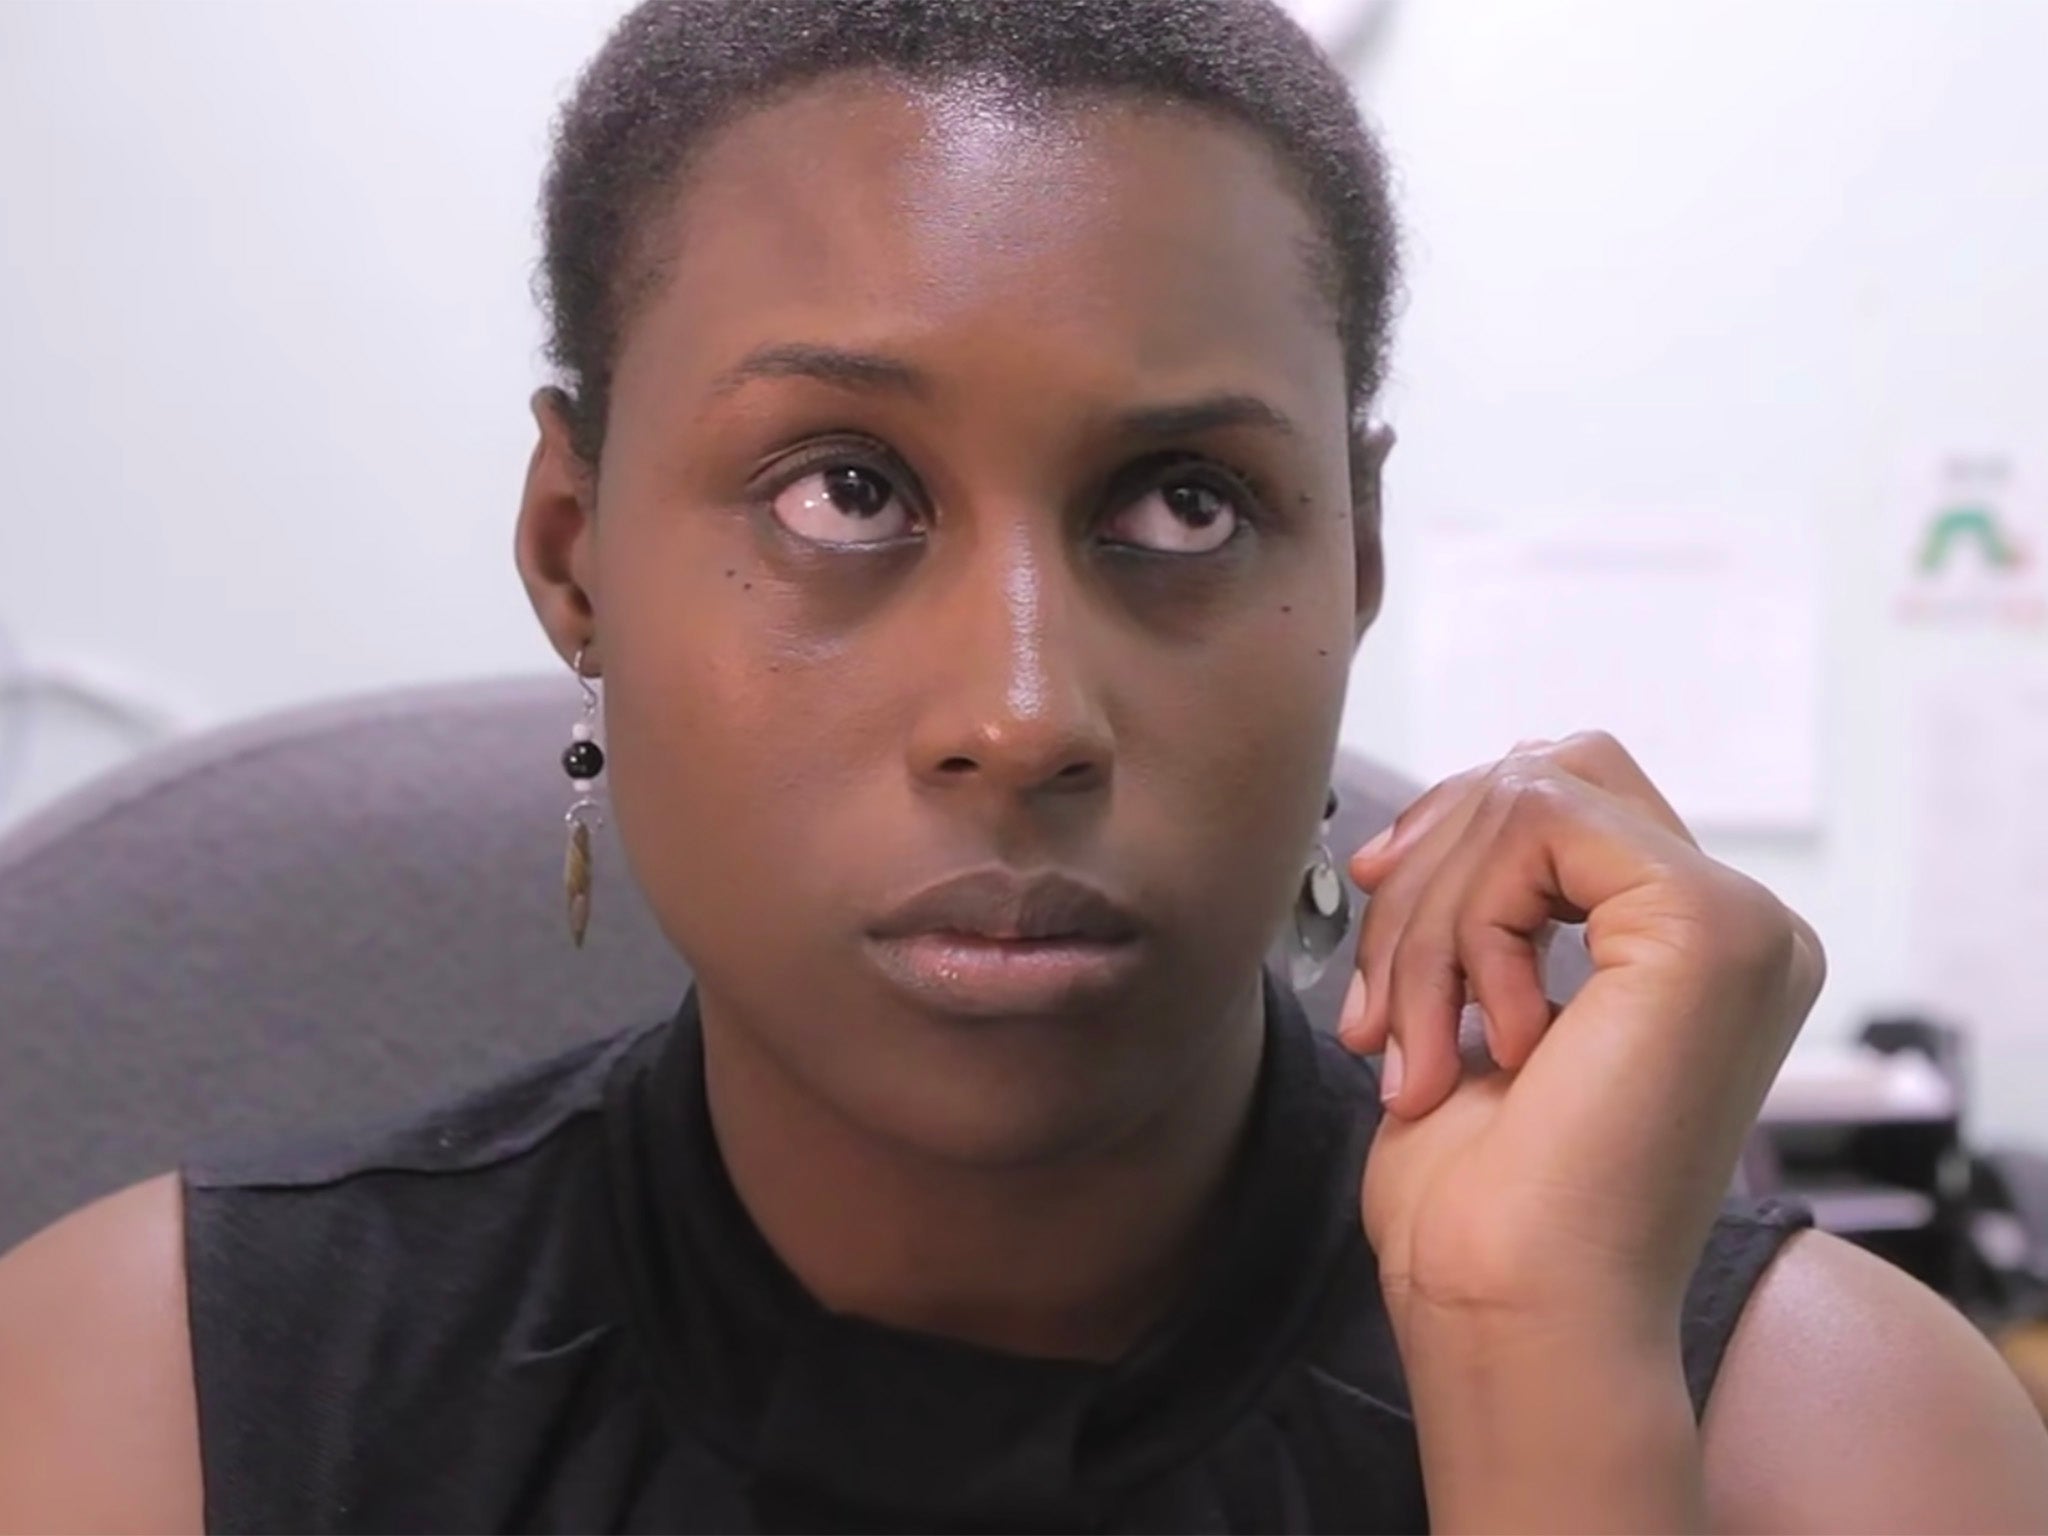 Issa Rae in ‘The Mis-Adventures of Awkward Black Girl’